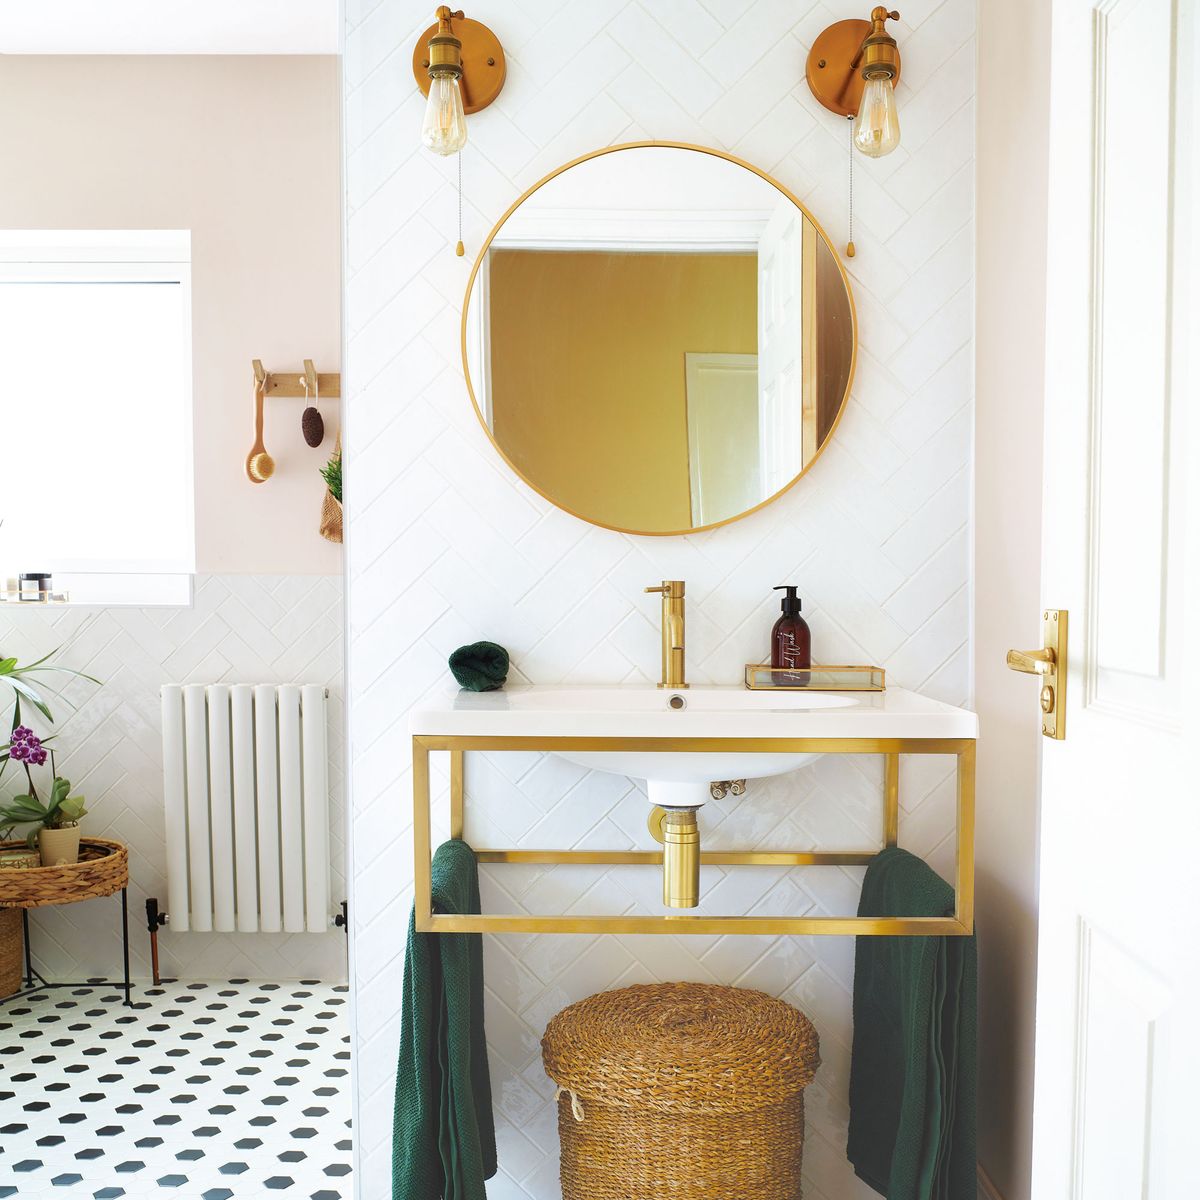 A layout change was key to creating this luxurious bathroom